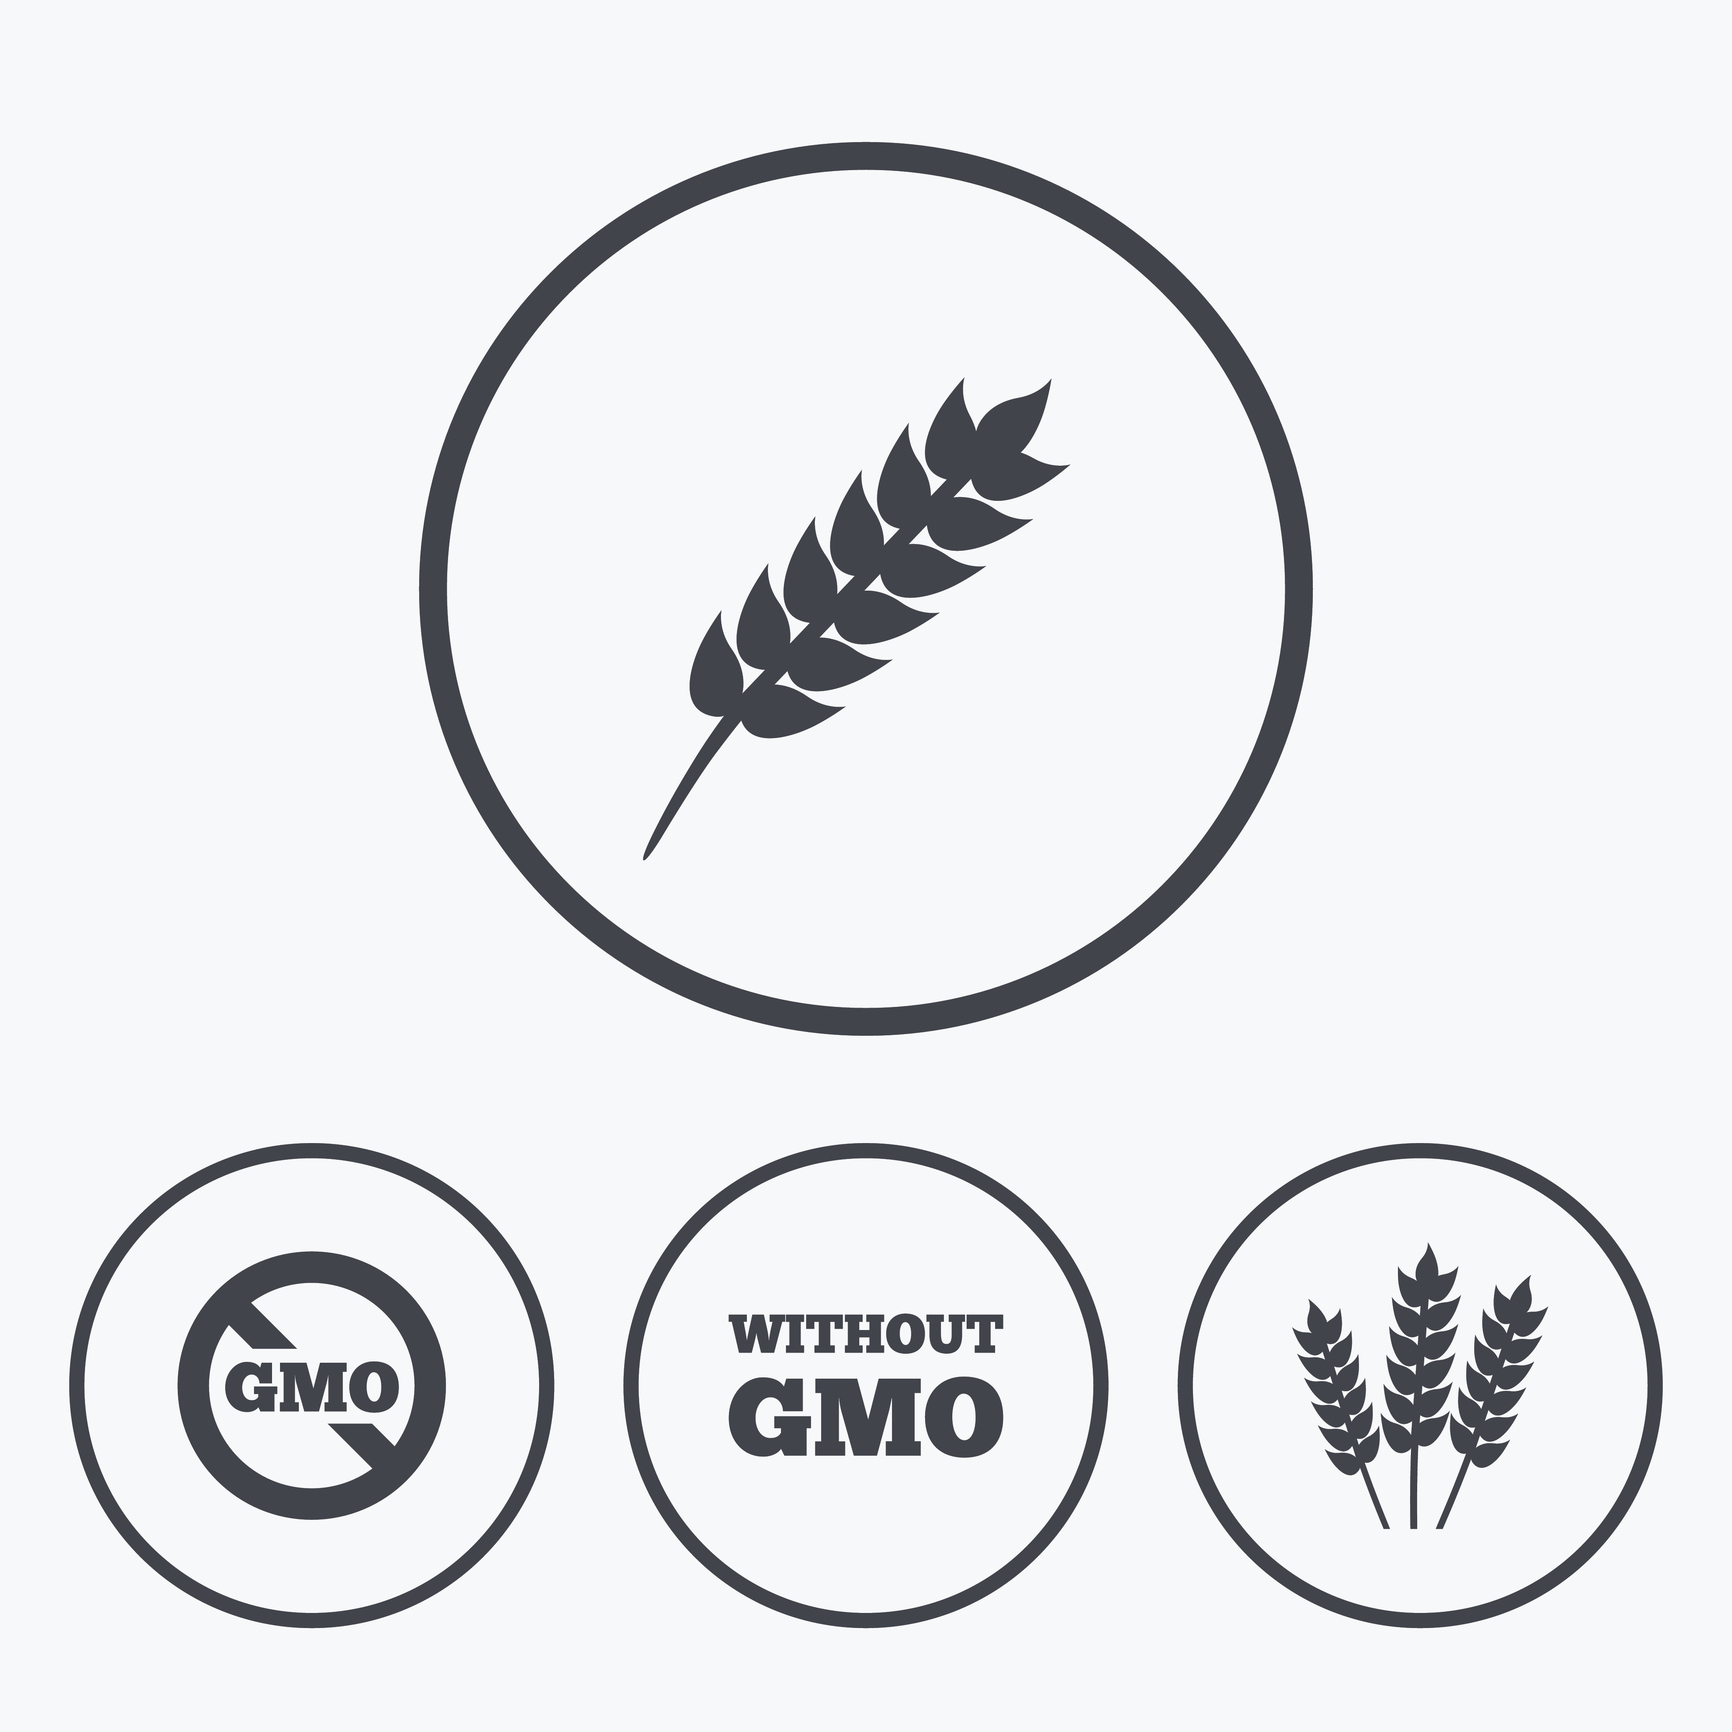 38 countries have banned GMOs